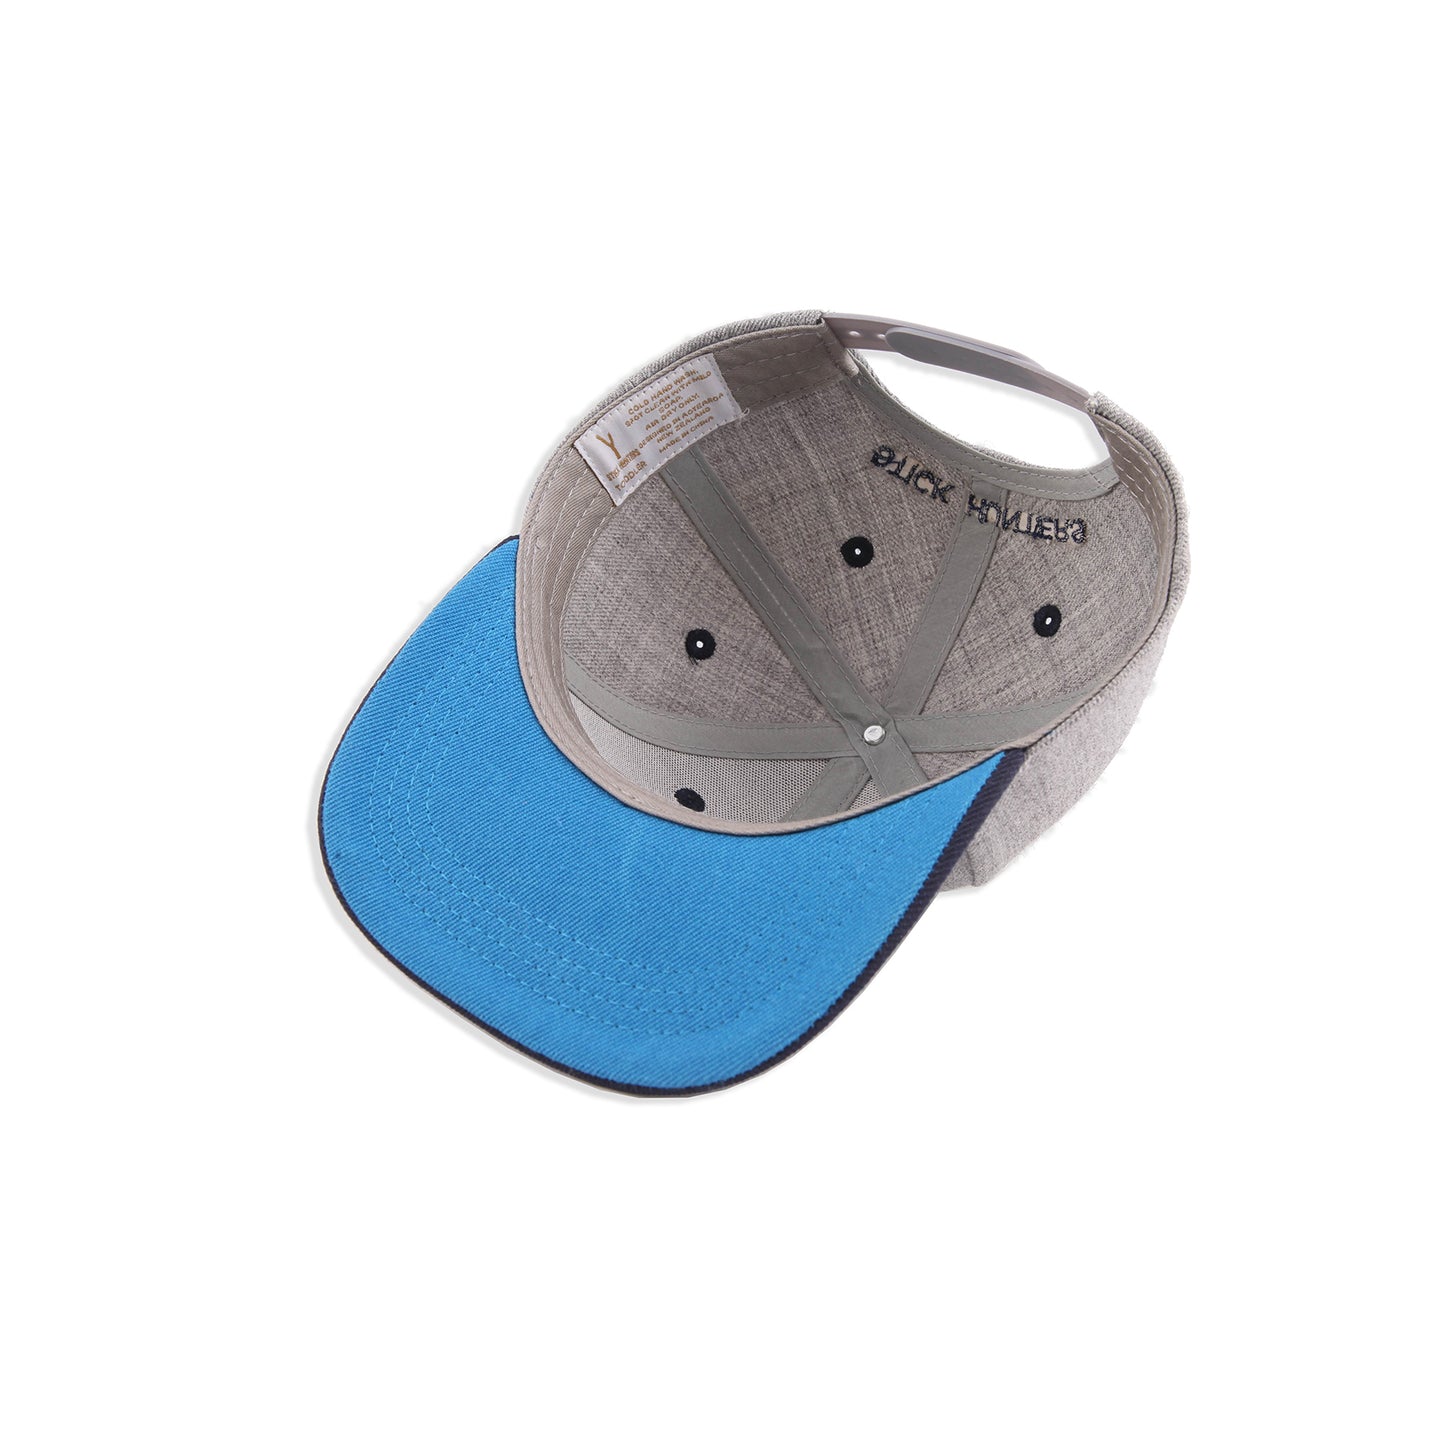 TODDLER AND KIDS SNAPBACK HAT - GREY AND BLUE